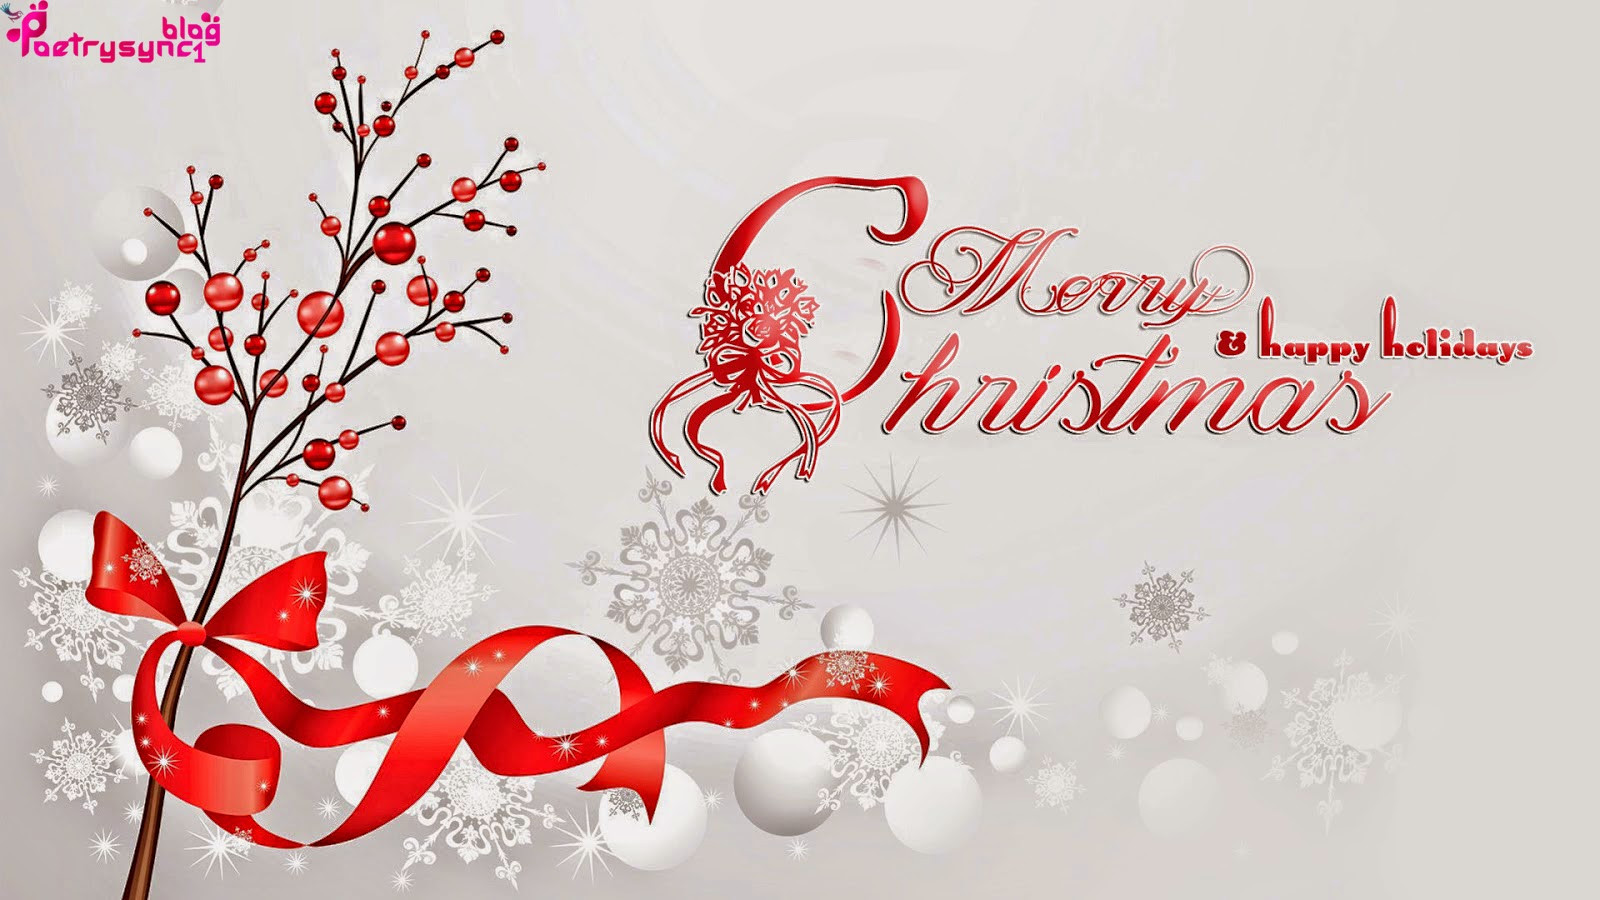 Happy Christmas Quotes
 Merry Christmas and Happy Holidays Wishes with